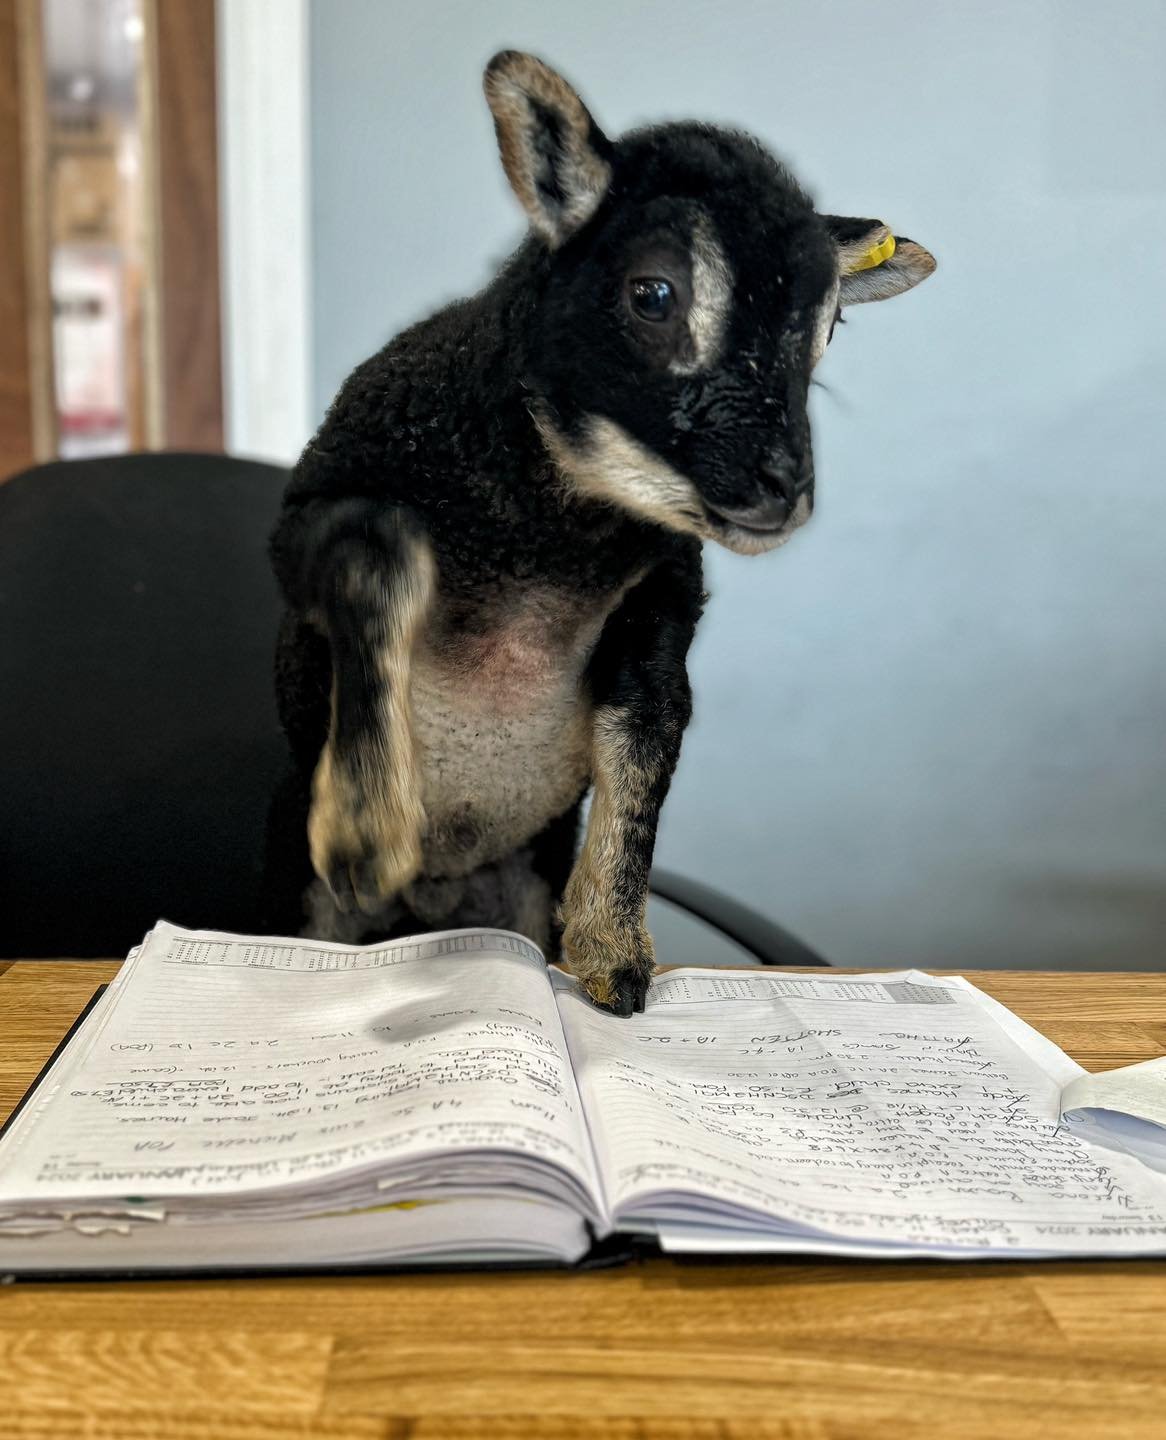 We are at reception ready to take your calls for the lamb feeding 🍼🐑
 
📞01443711772
💌DM US 

Please ensure you have your booking reference code, date, time and names of the people feeding the lambs 

As you can imagine we've been RAM-raided with 